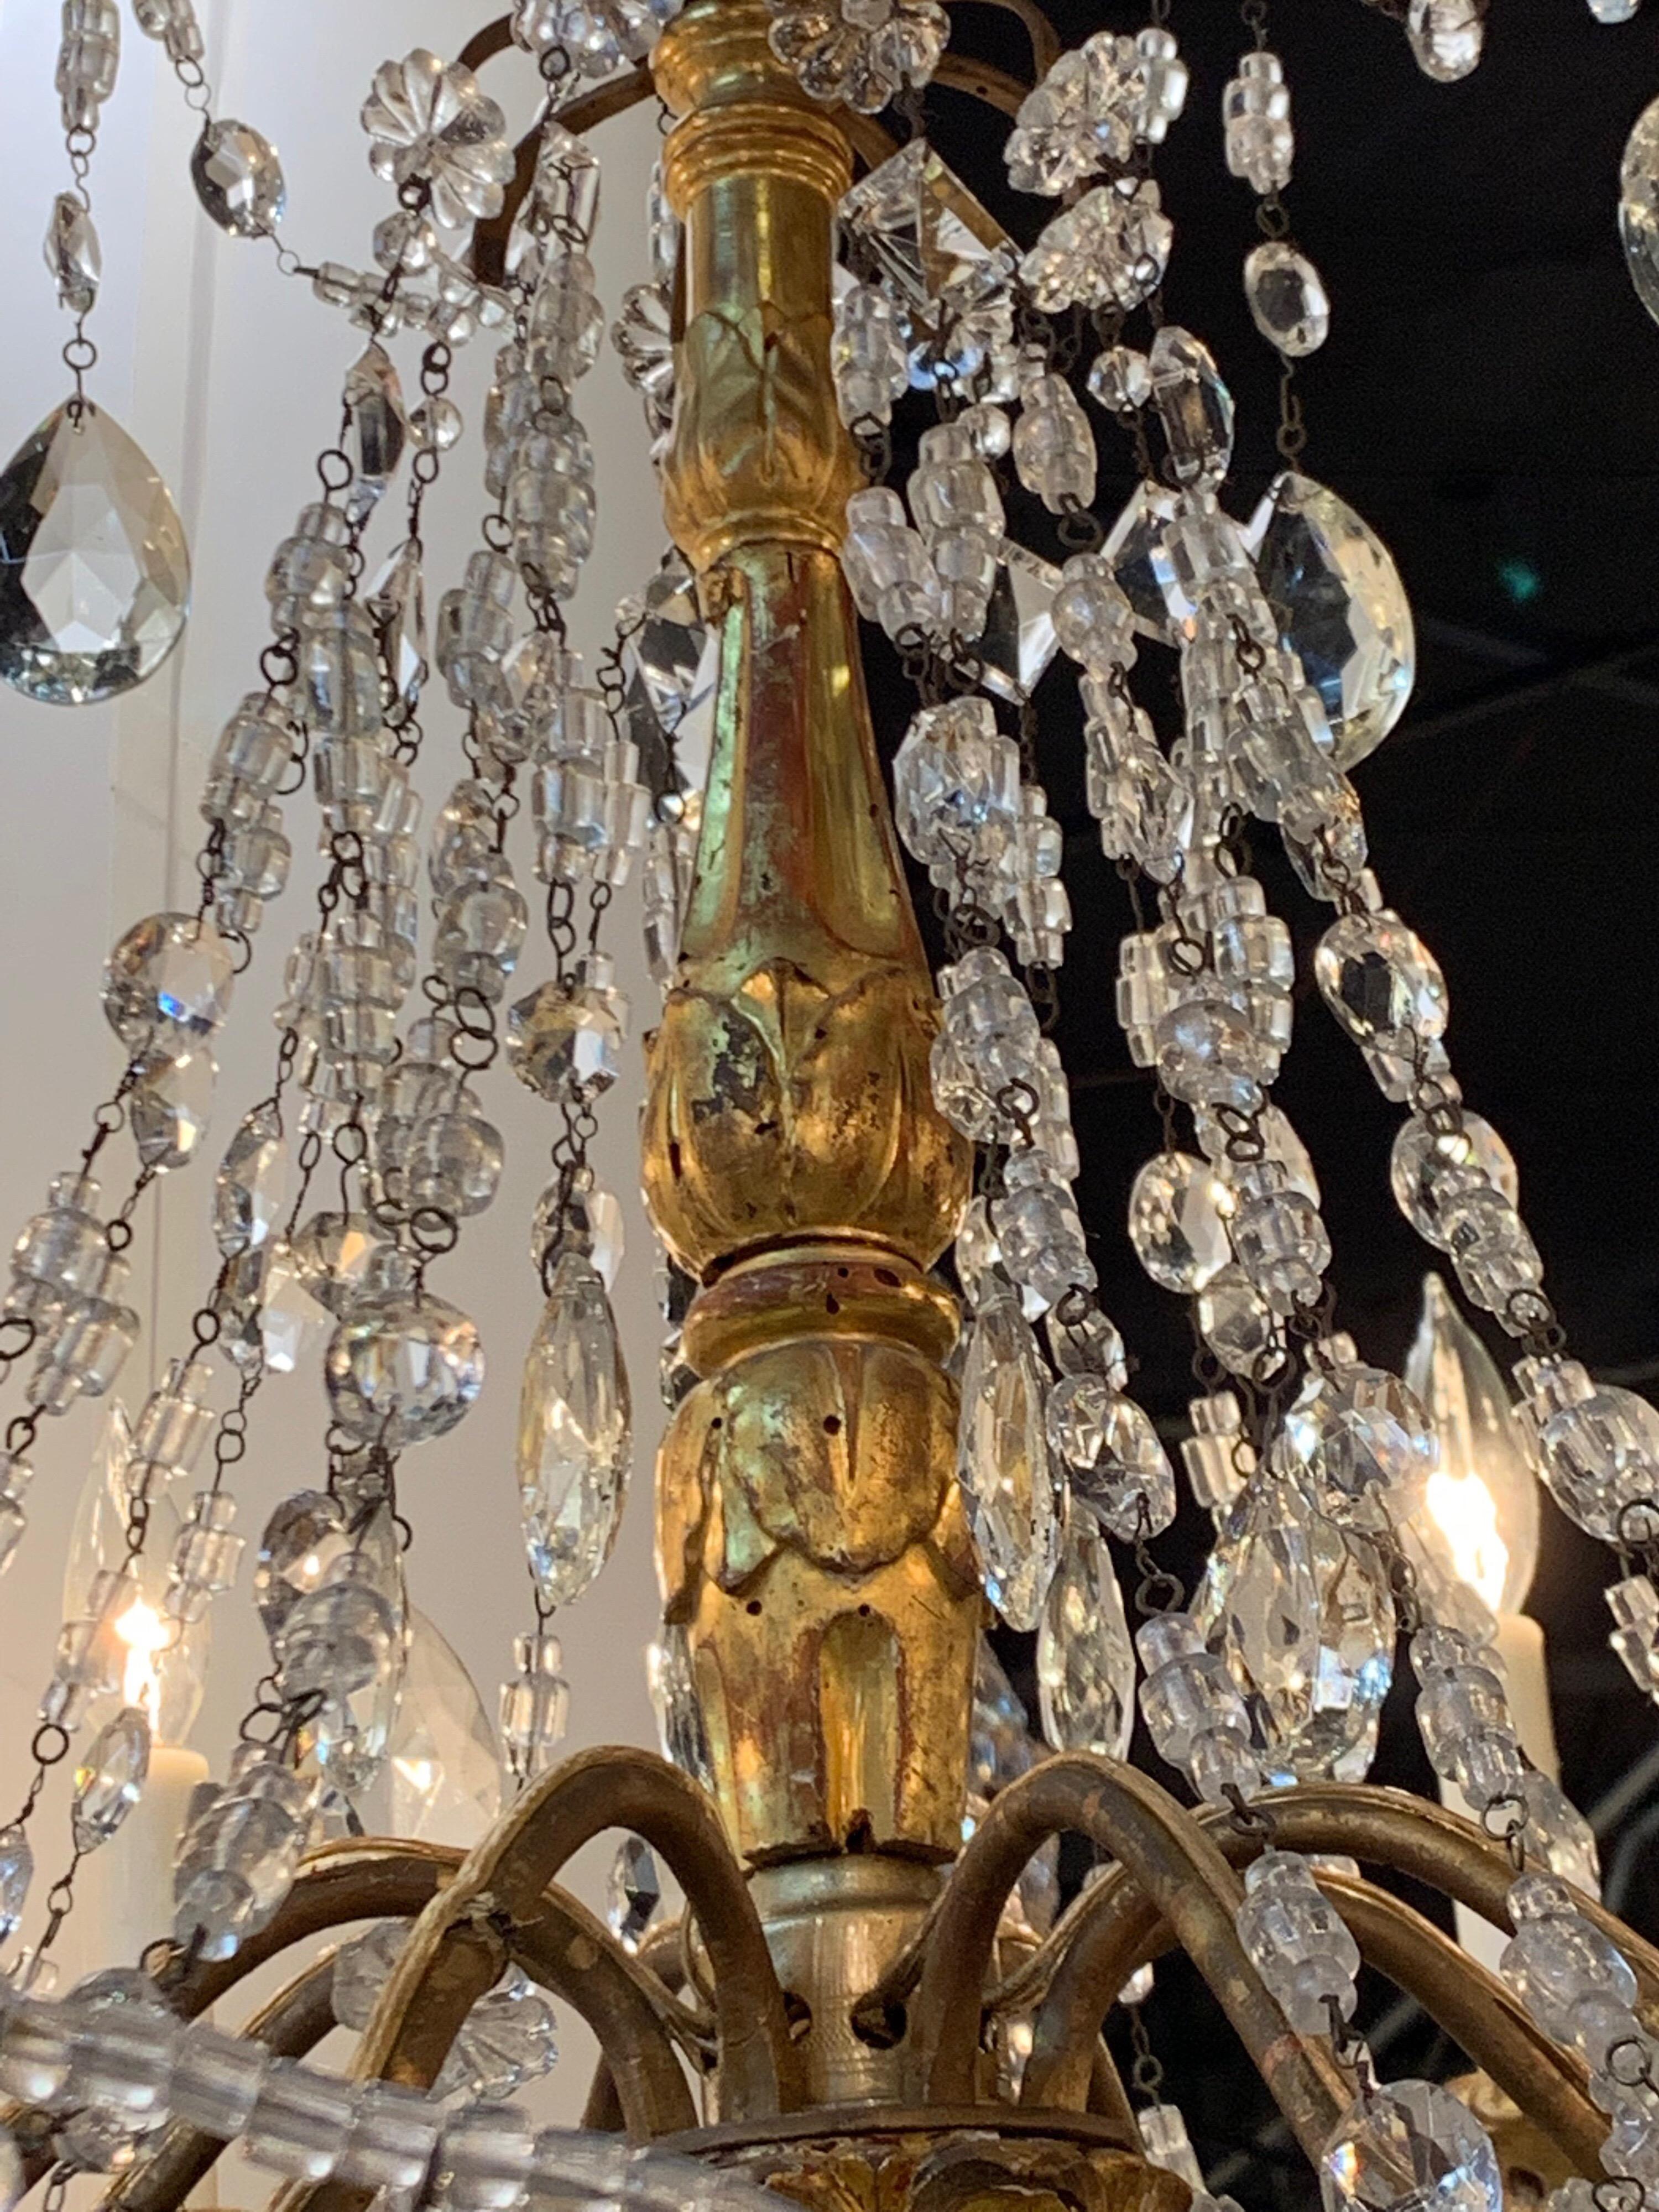 Beautiful Italian giltwood and beaded crystal chandelier. Very nice gilt and carvings on the wood with an abundance of beads and prisms. Perfect for an elegant home.